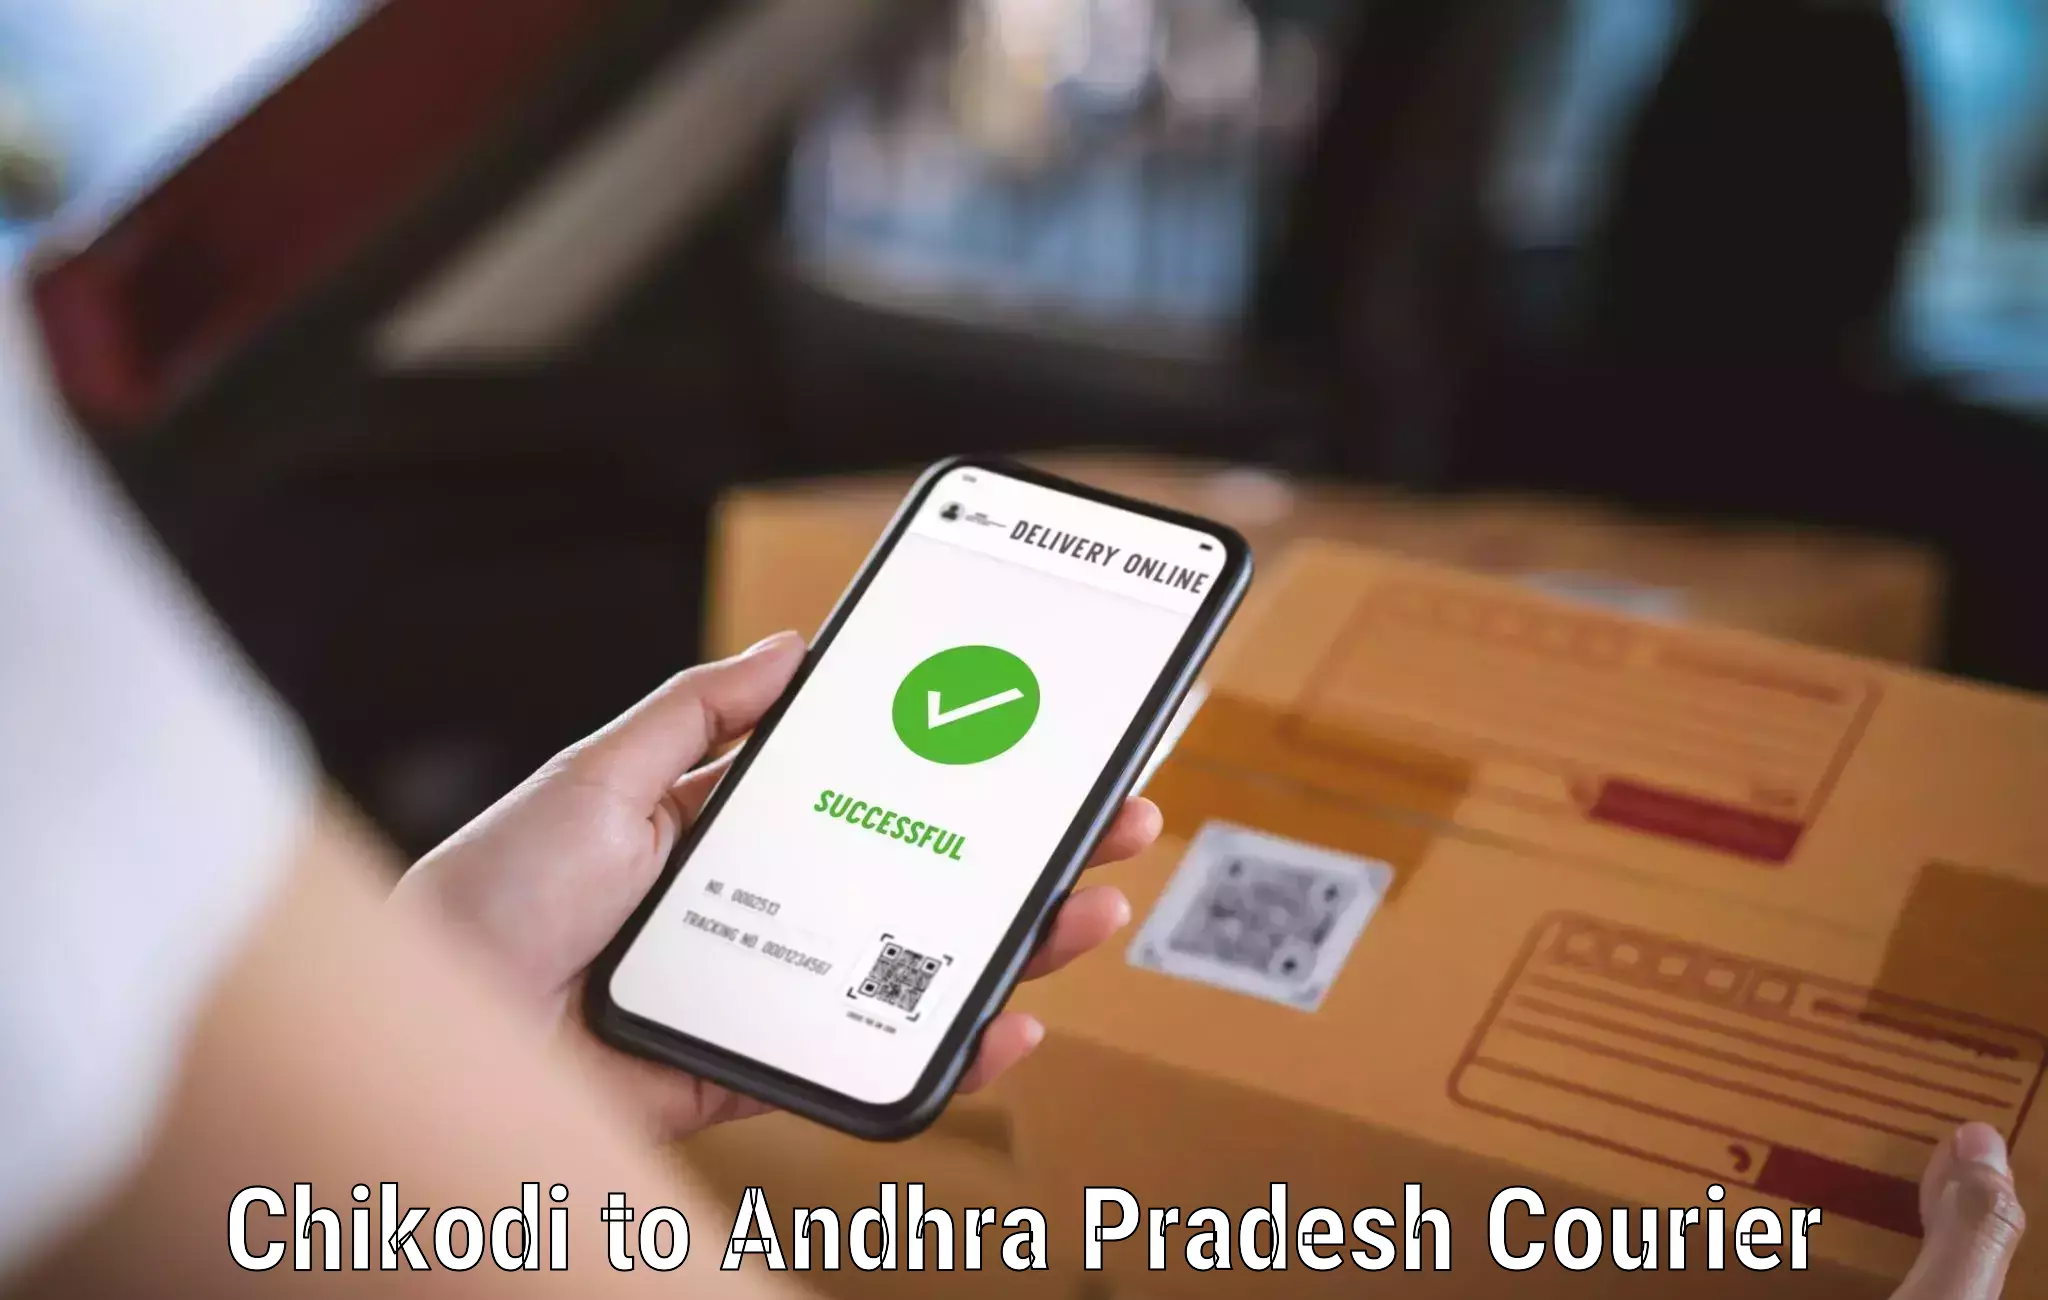 Business delivery service Chikodi to Andhra Pradesh